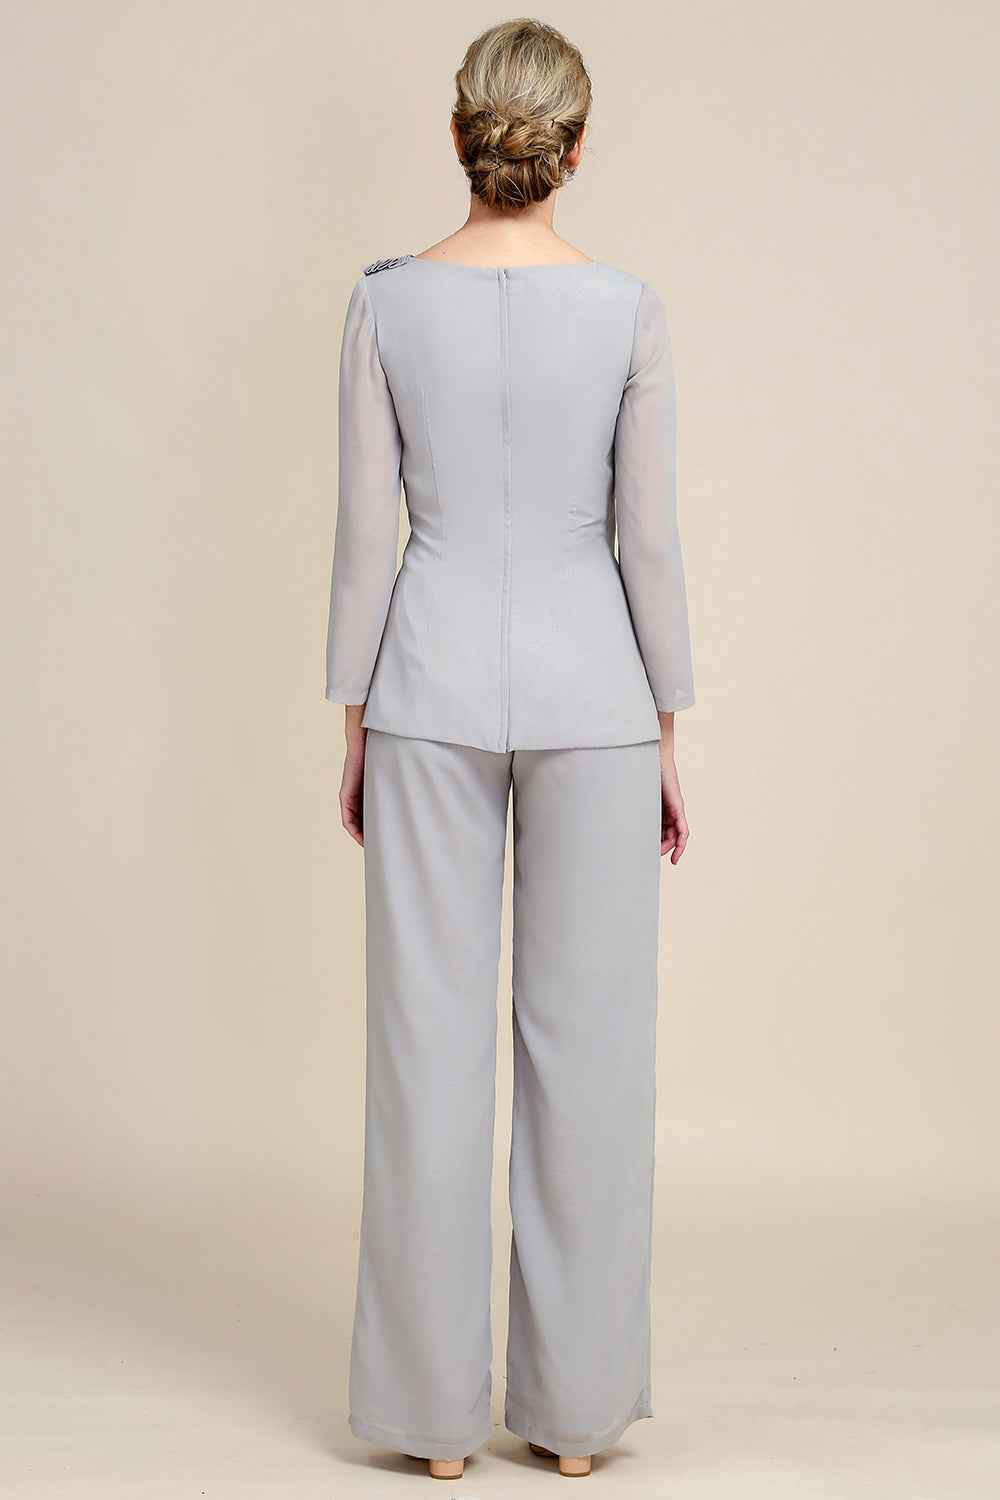 Elegant Grey Two-piece Chiffon Mother of The Bride Pant Suit